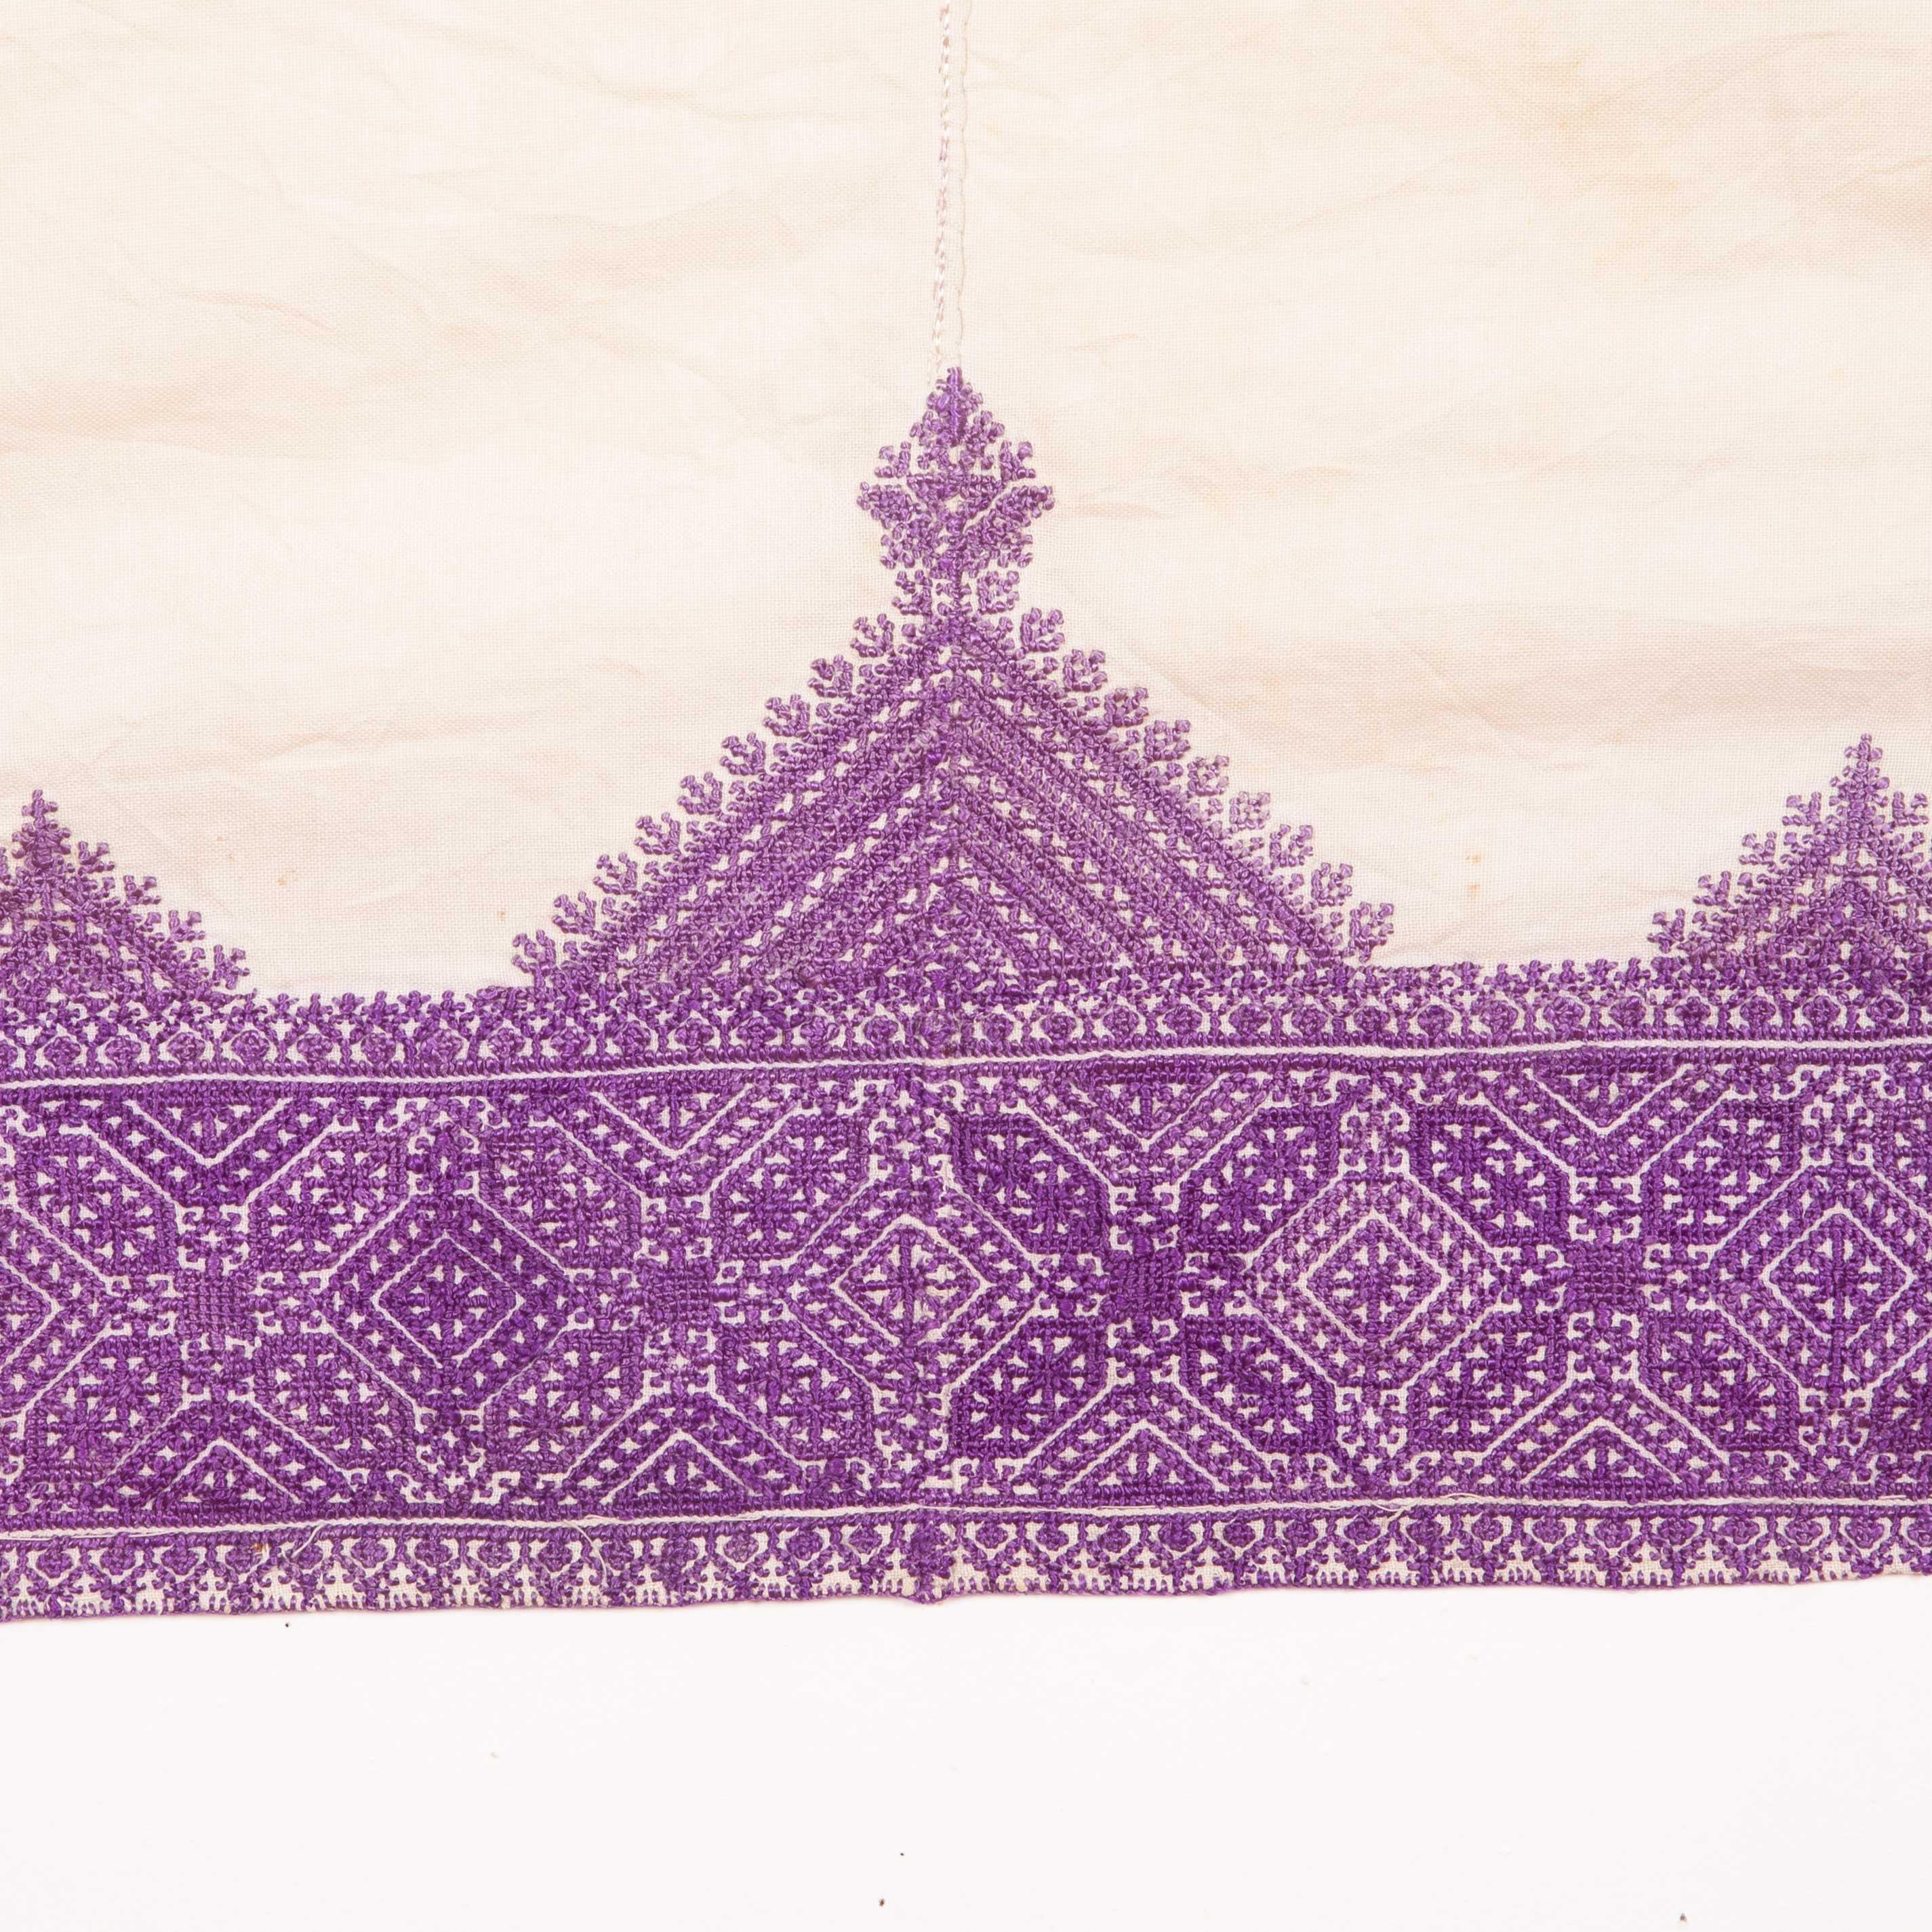 Silk Antique Fez Embroidered Seat Cover 'Gelsa' from Morocco, Early 20th Century For Sale